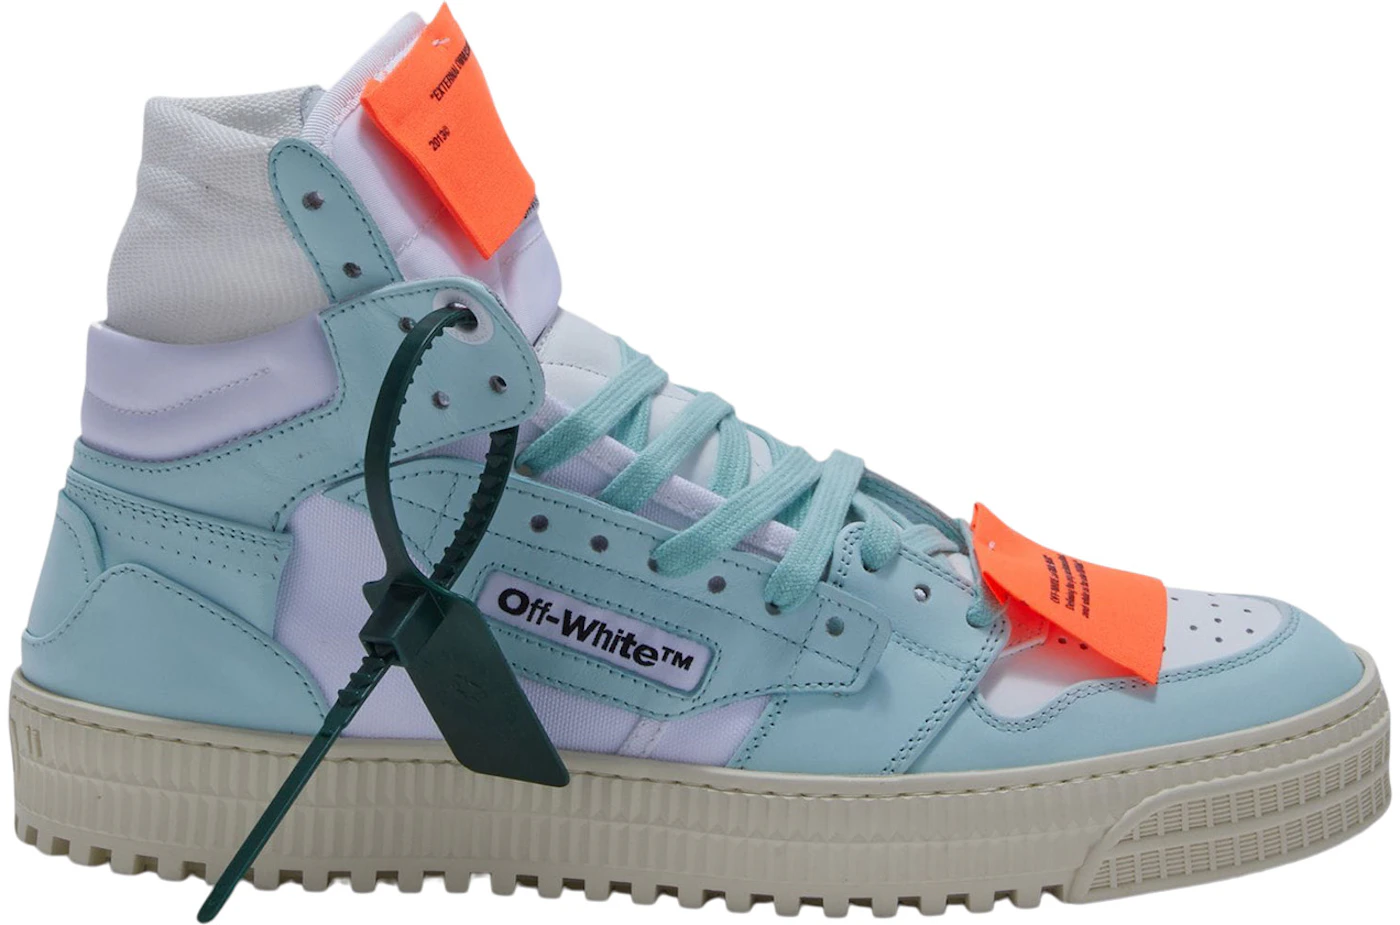 Off-White aw18 footwear and accessories